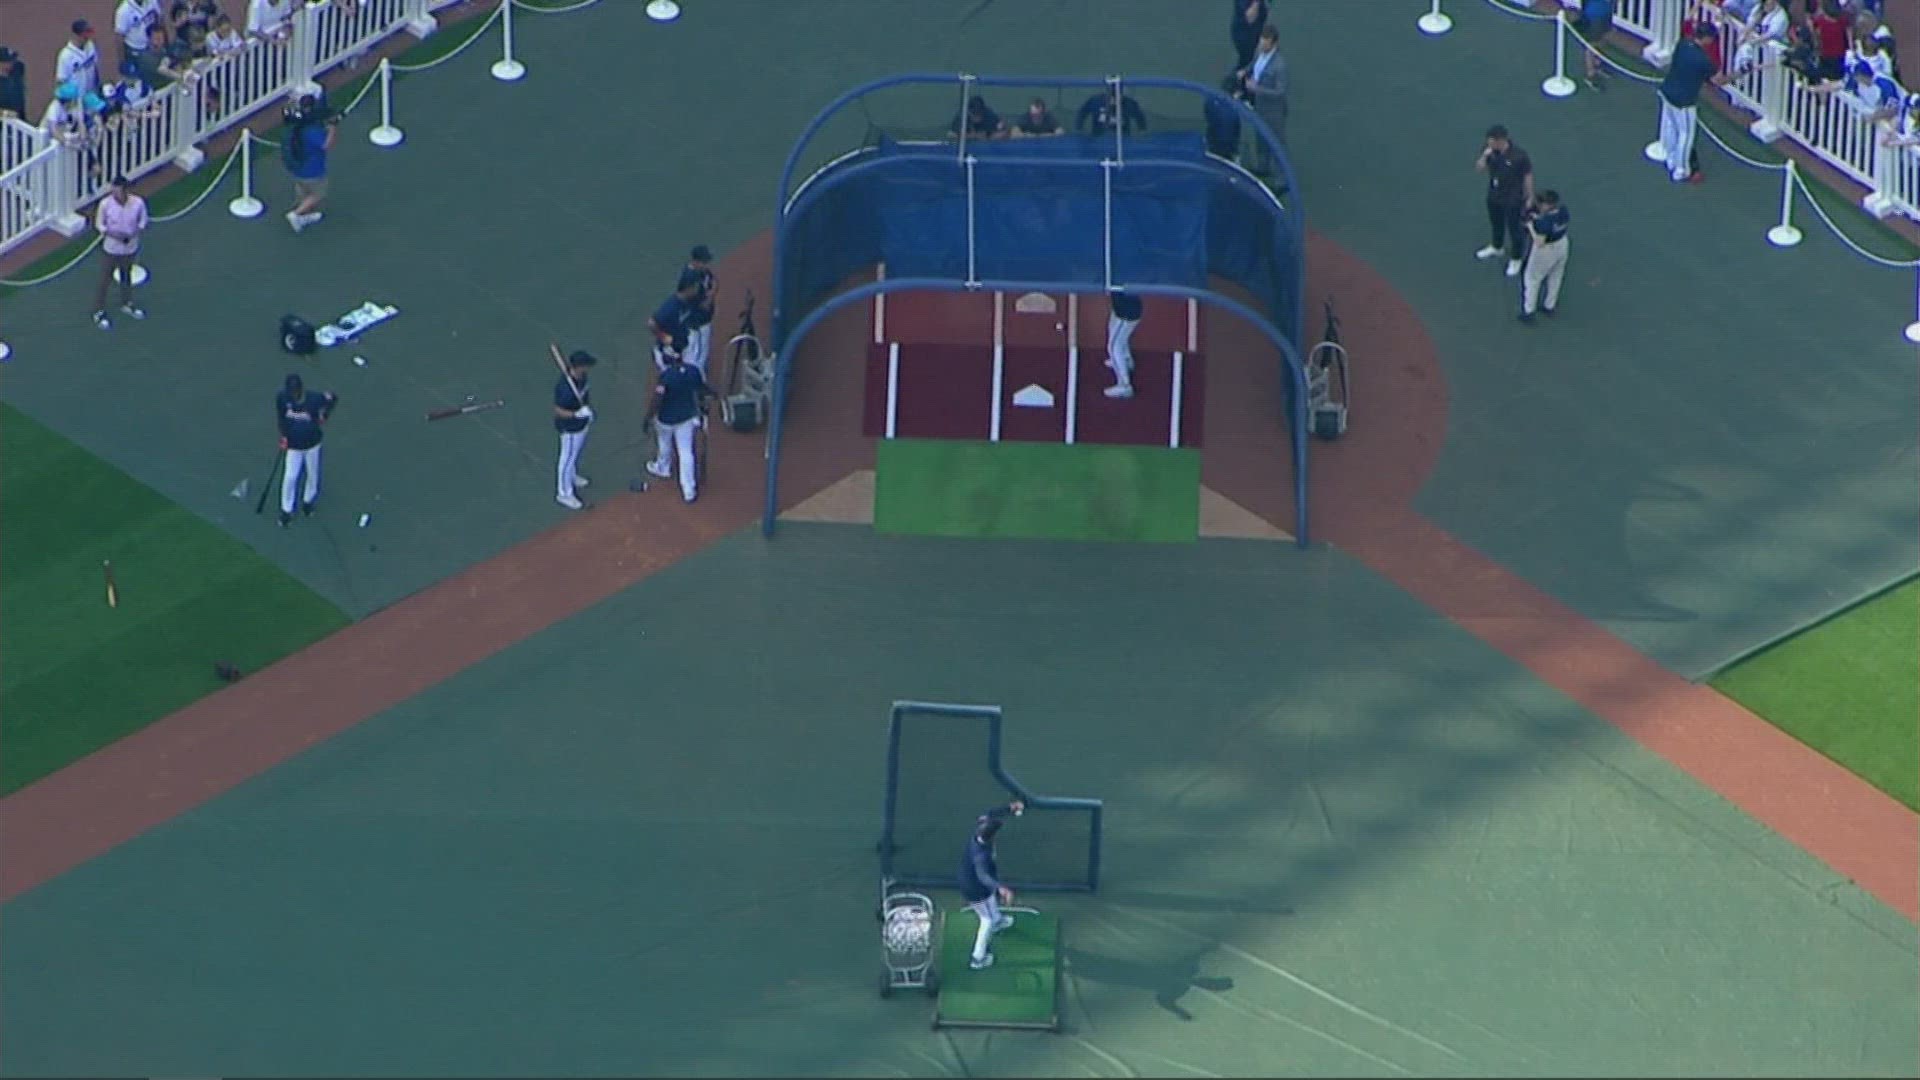 Braves take batting practice on field before home opener against Padres